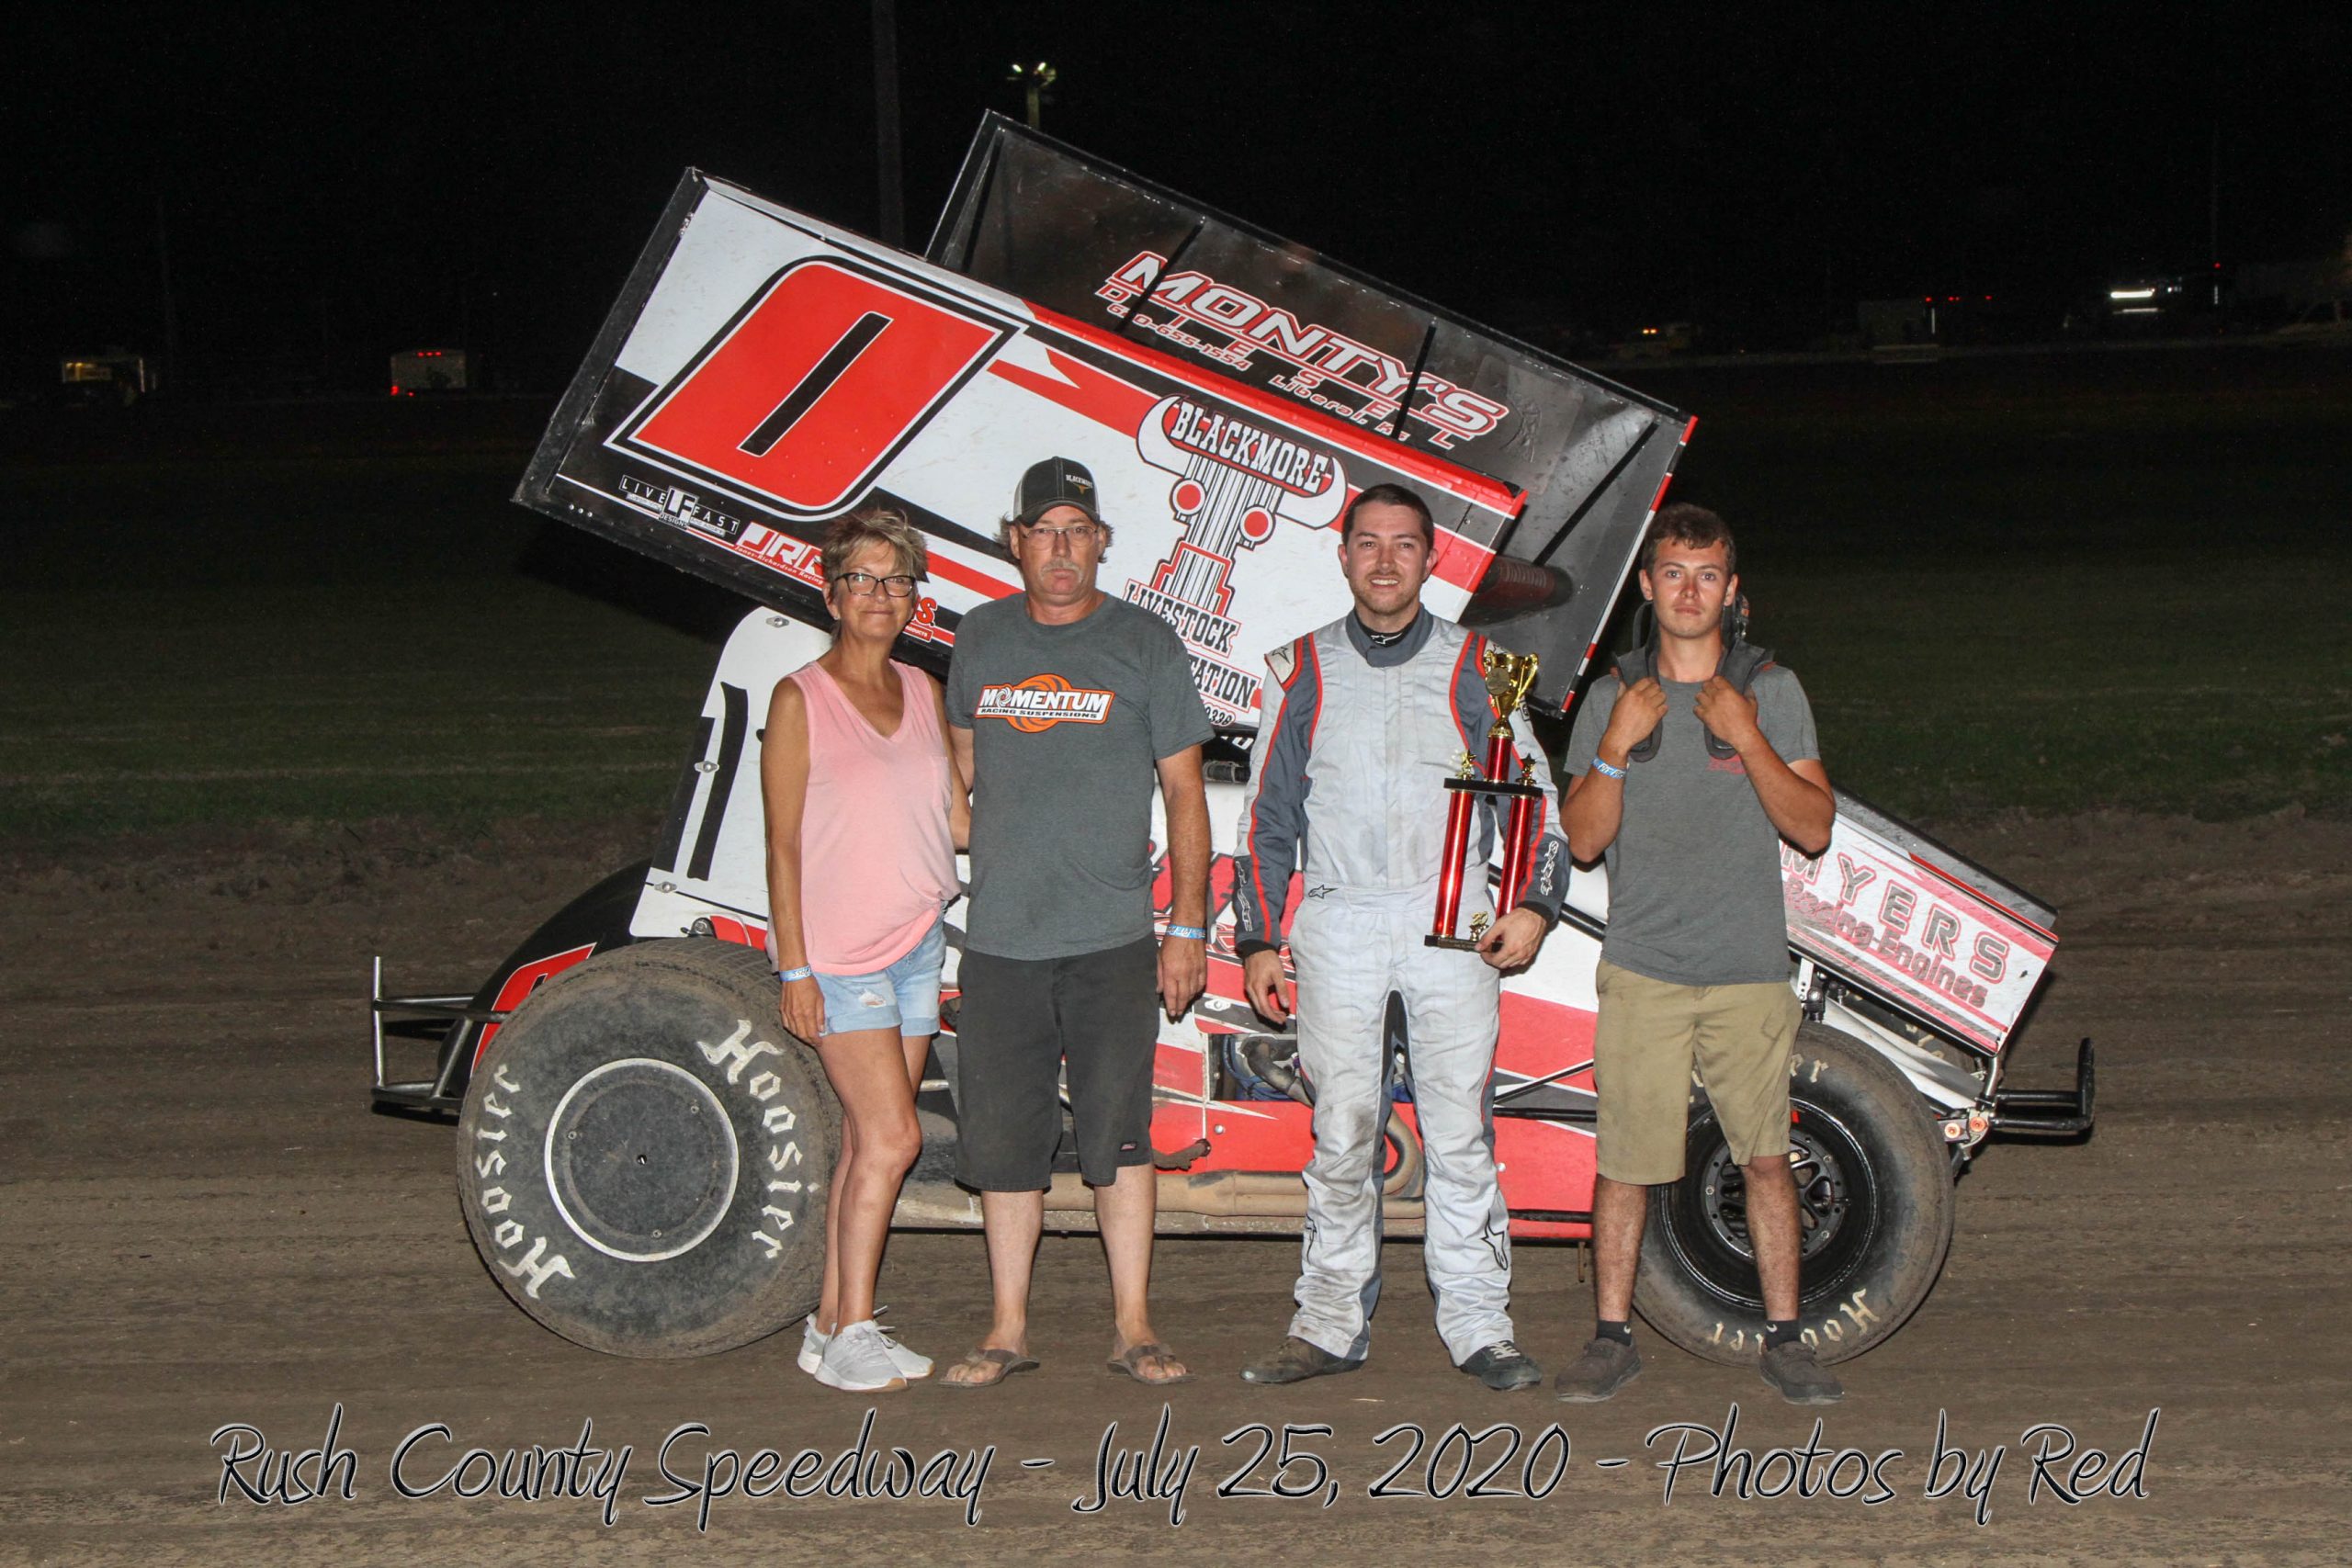 Steven Richardson Claims URSS Victory with Last Lap Pass at Rush Co. Speedway